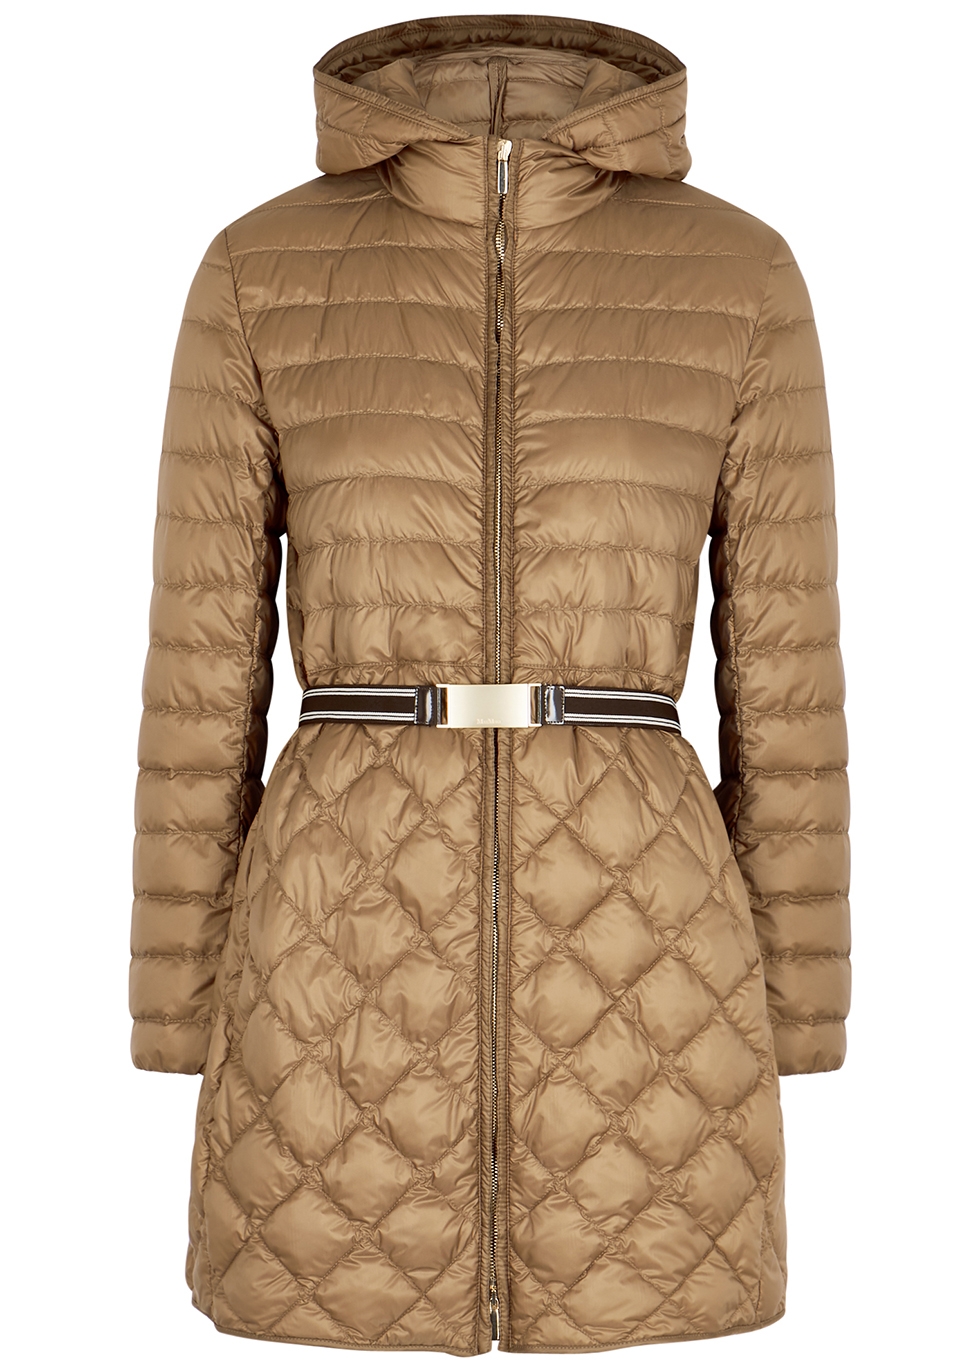 Etrevi camel quilted shell jacket